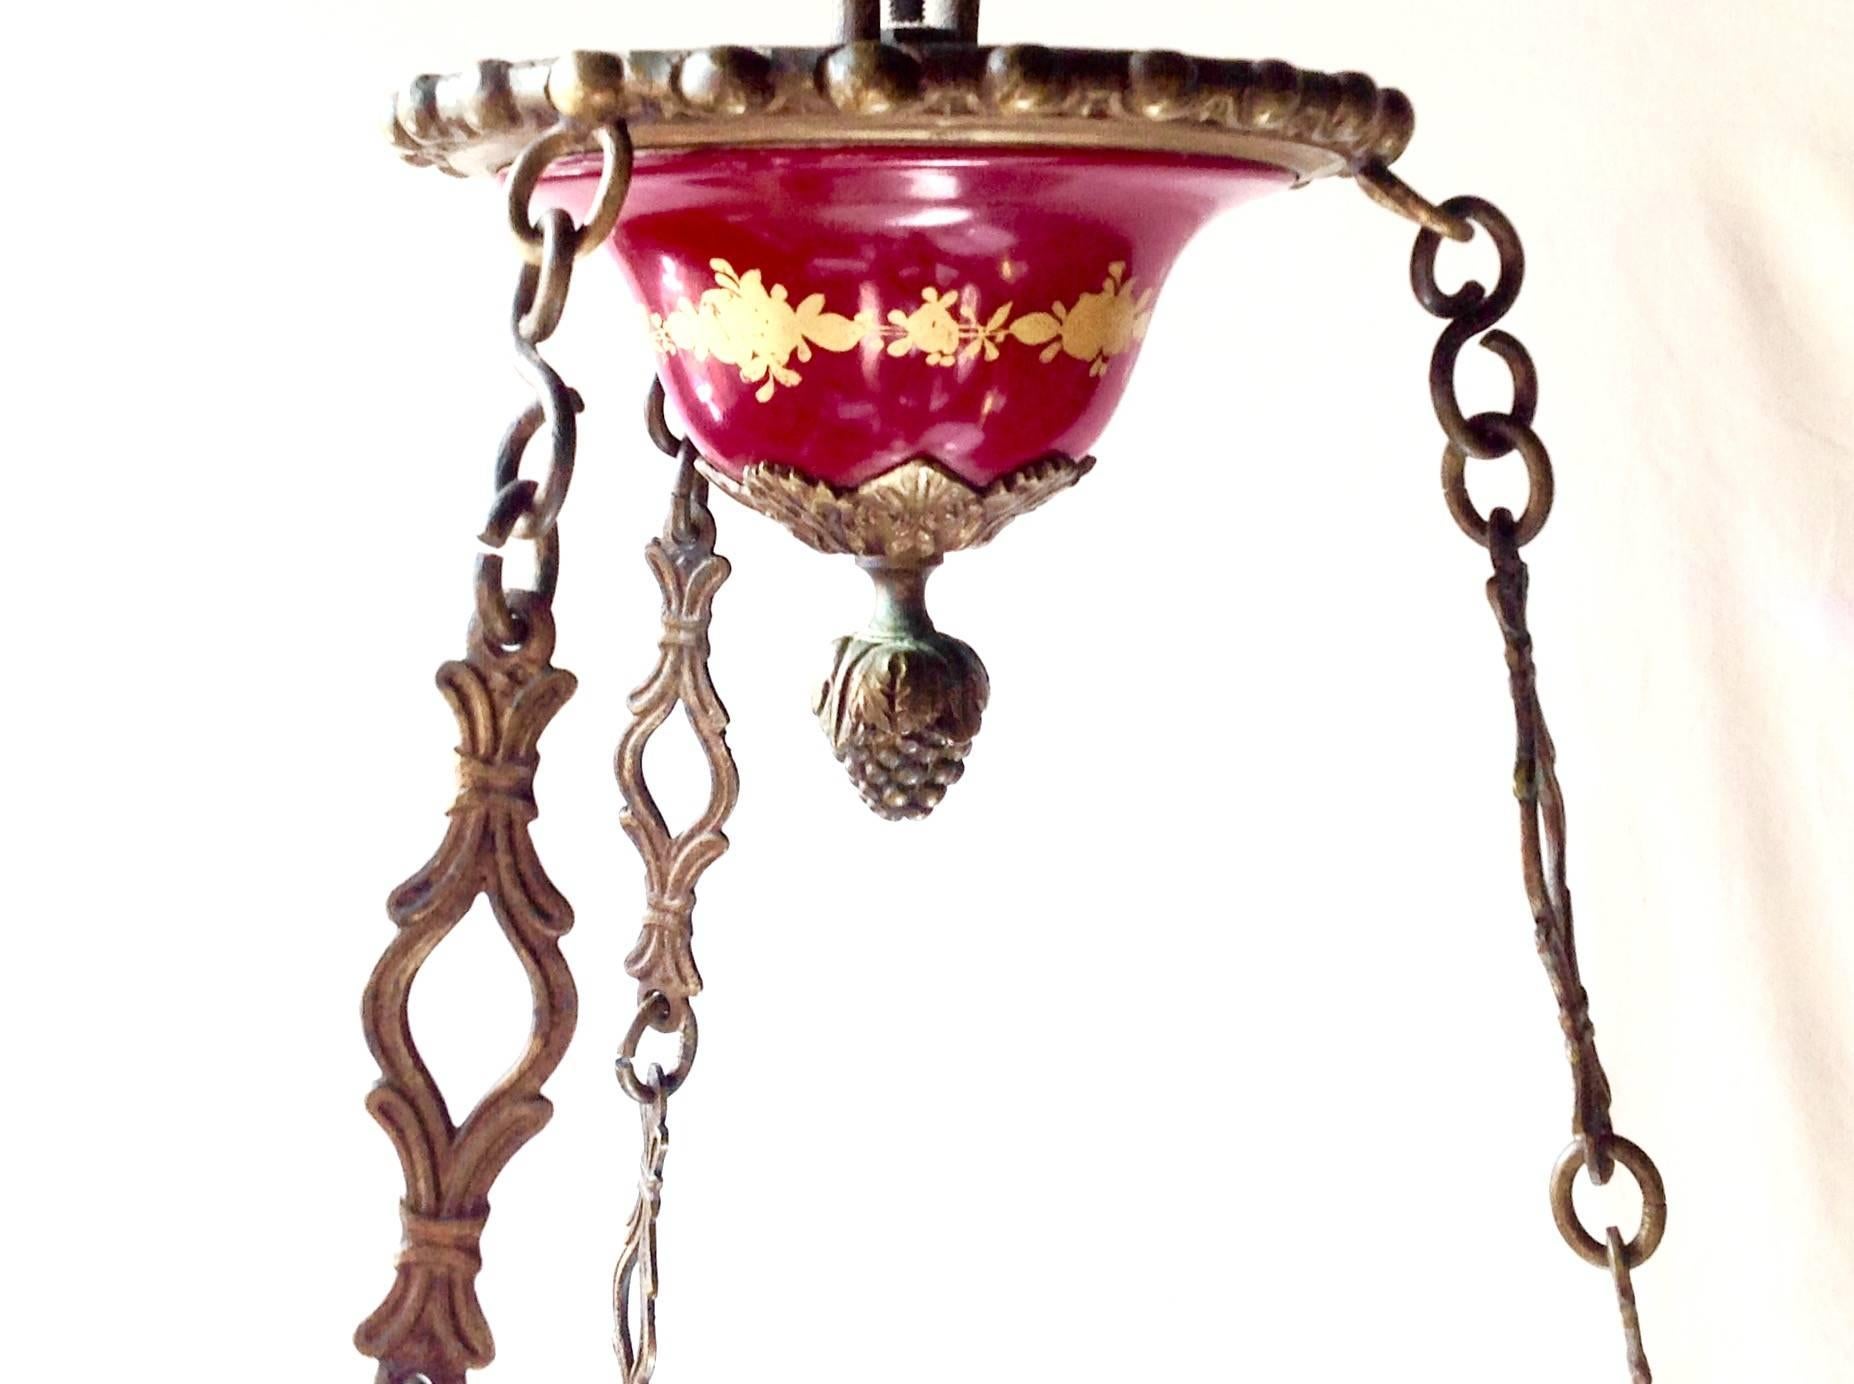 Early 1800s French Sèvres porcelain Regency Empire chandelier, nine lights, bronze or brass arms, originally candle, has been electrified. Can be restored to UL Wiring. Measures 30 inches high and 20 inches wide.